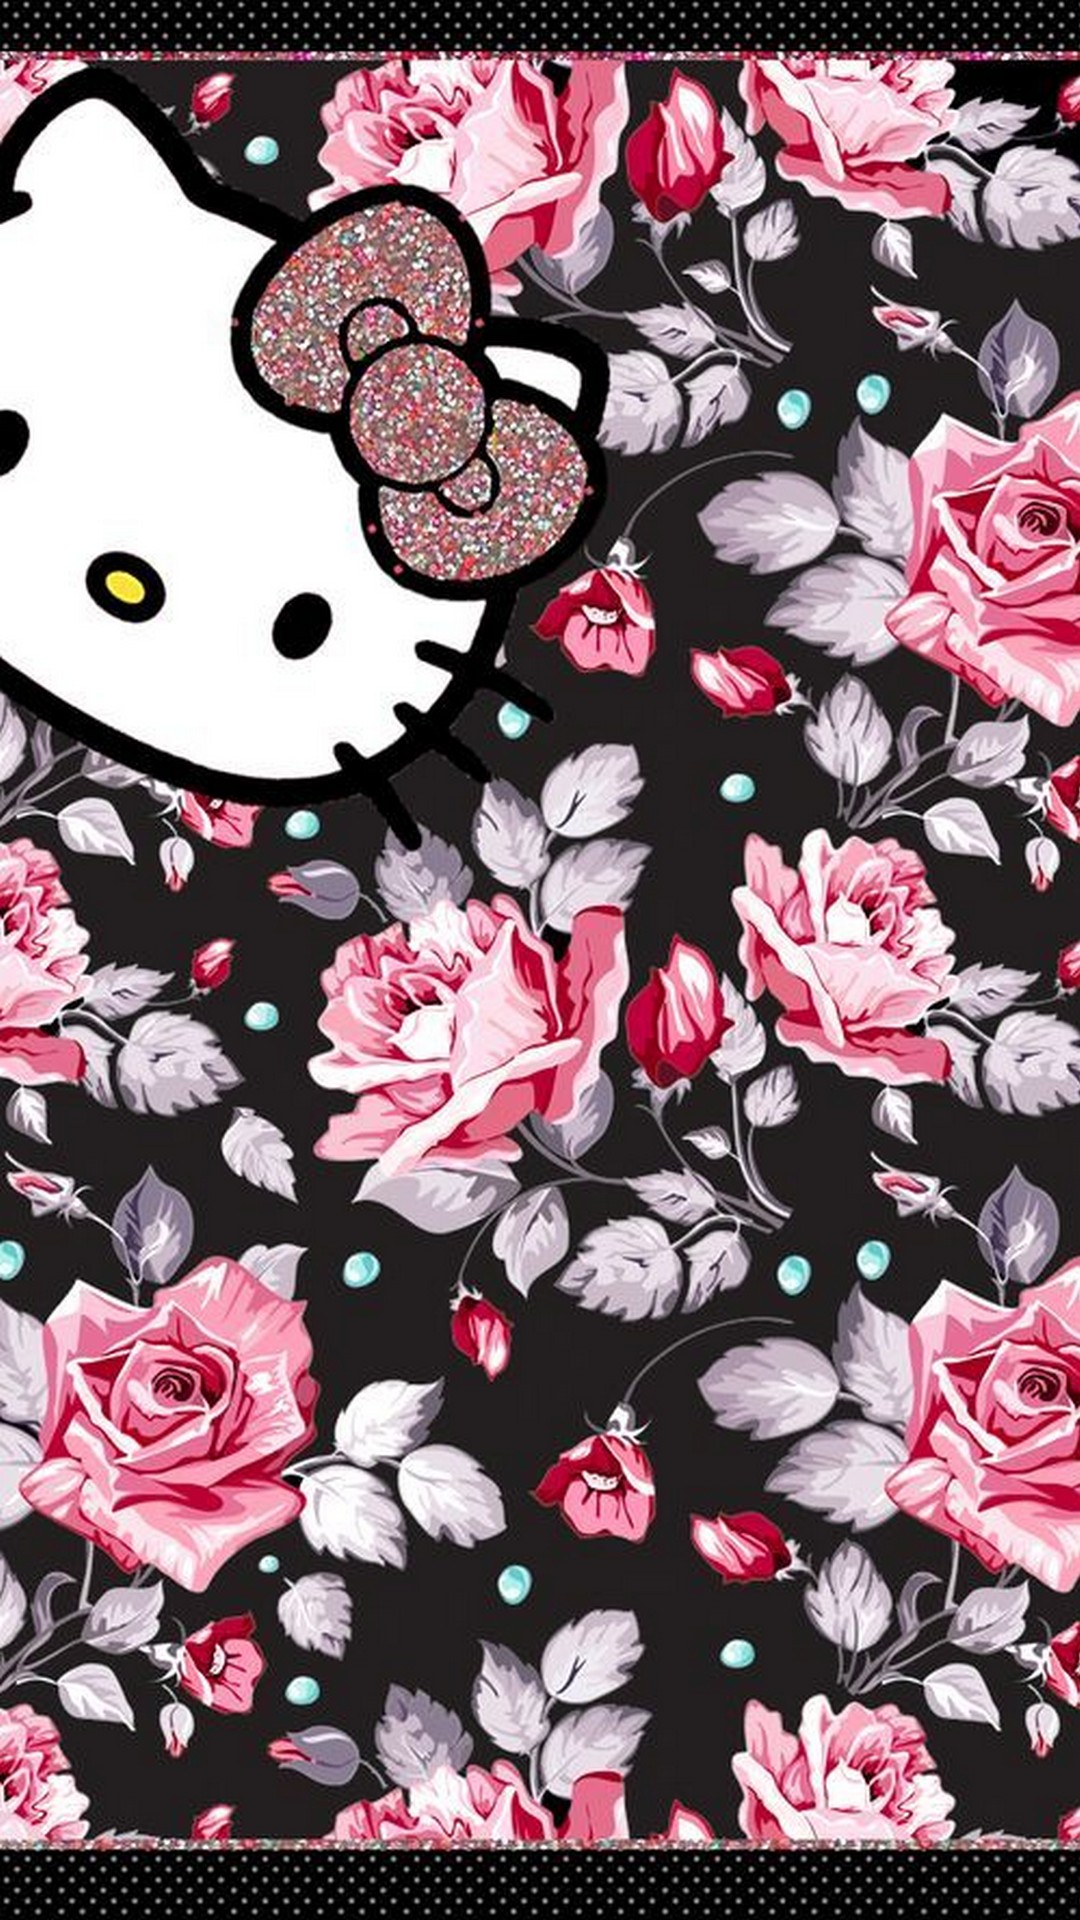 Hello Kitty Image Wallpaper Android With Image Resolution Kitty Wallpaper HD 4k